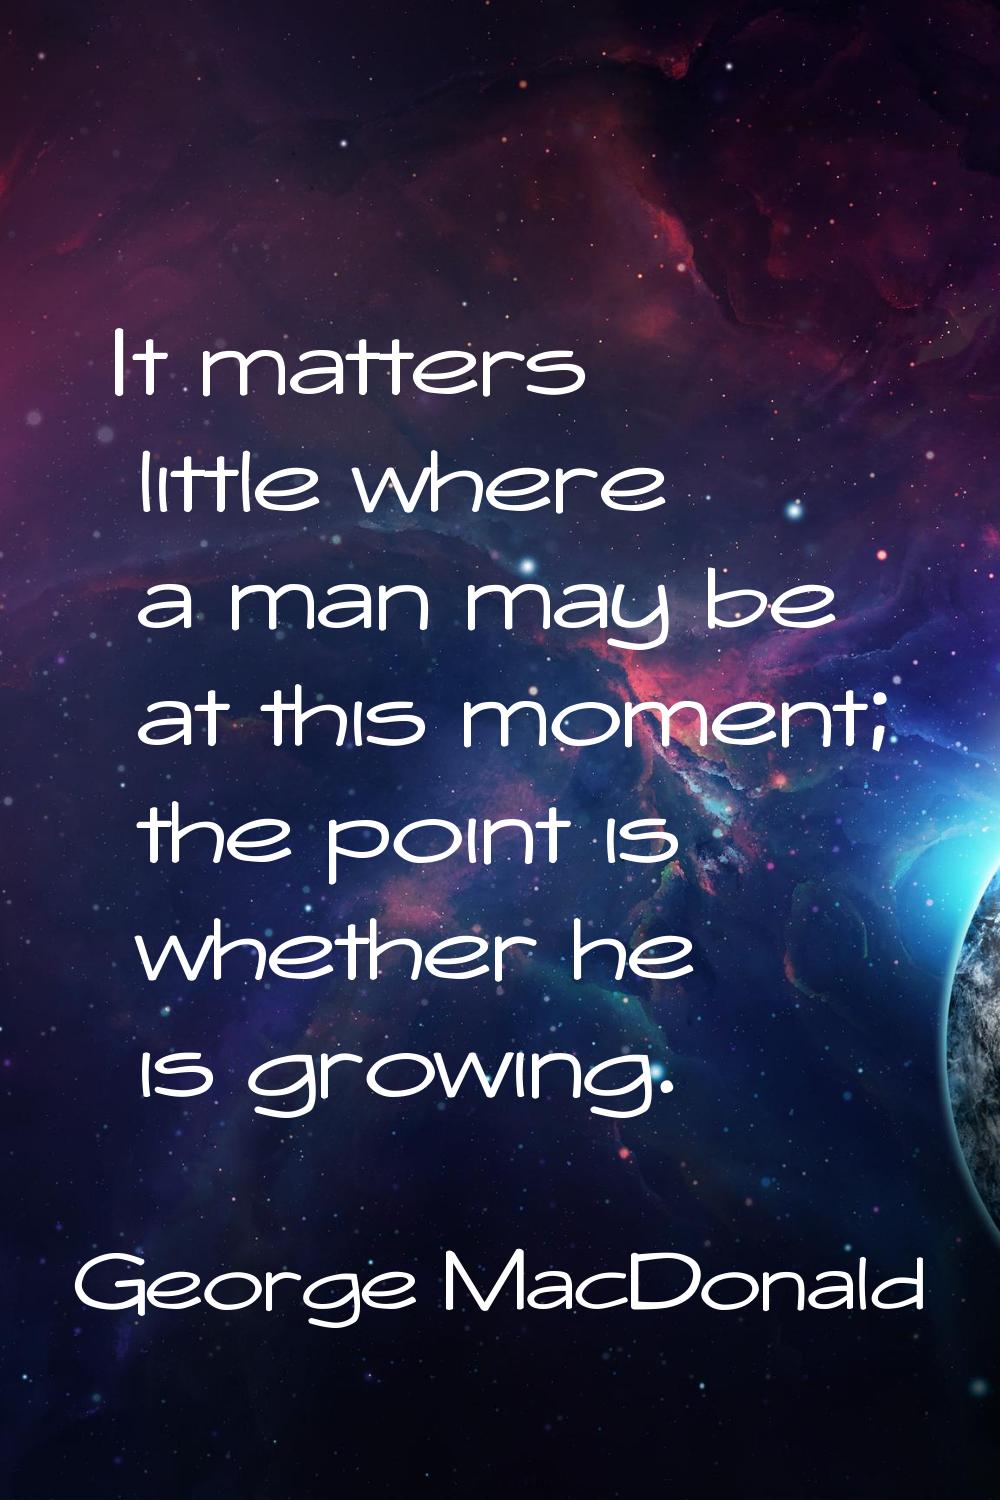 It matters little where a man may be at this moment; the point is whether he is growing.